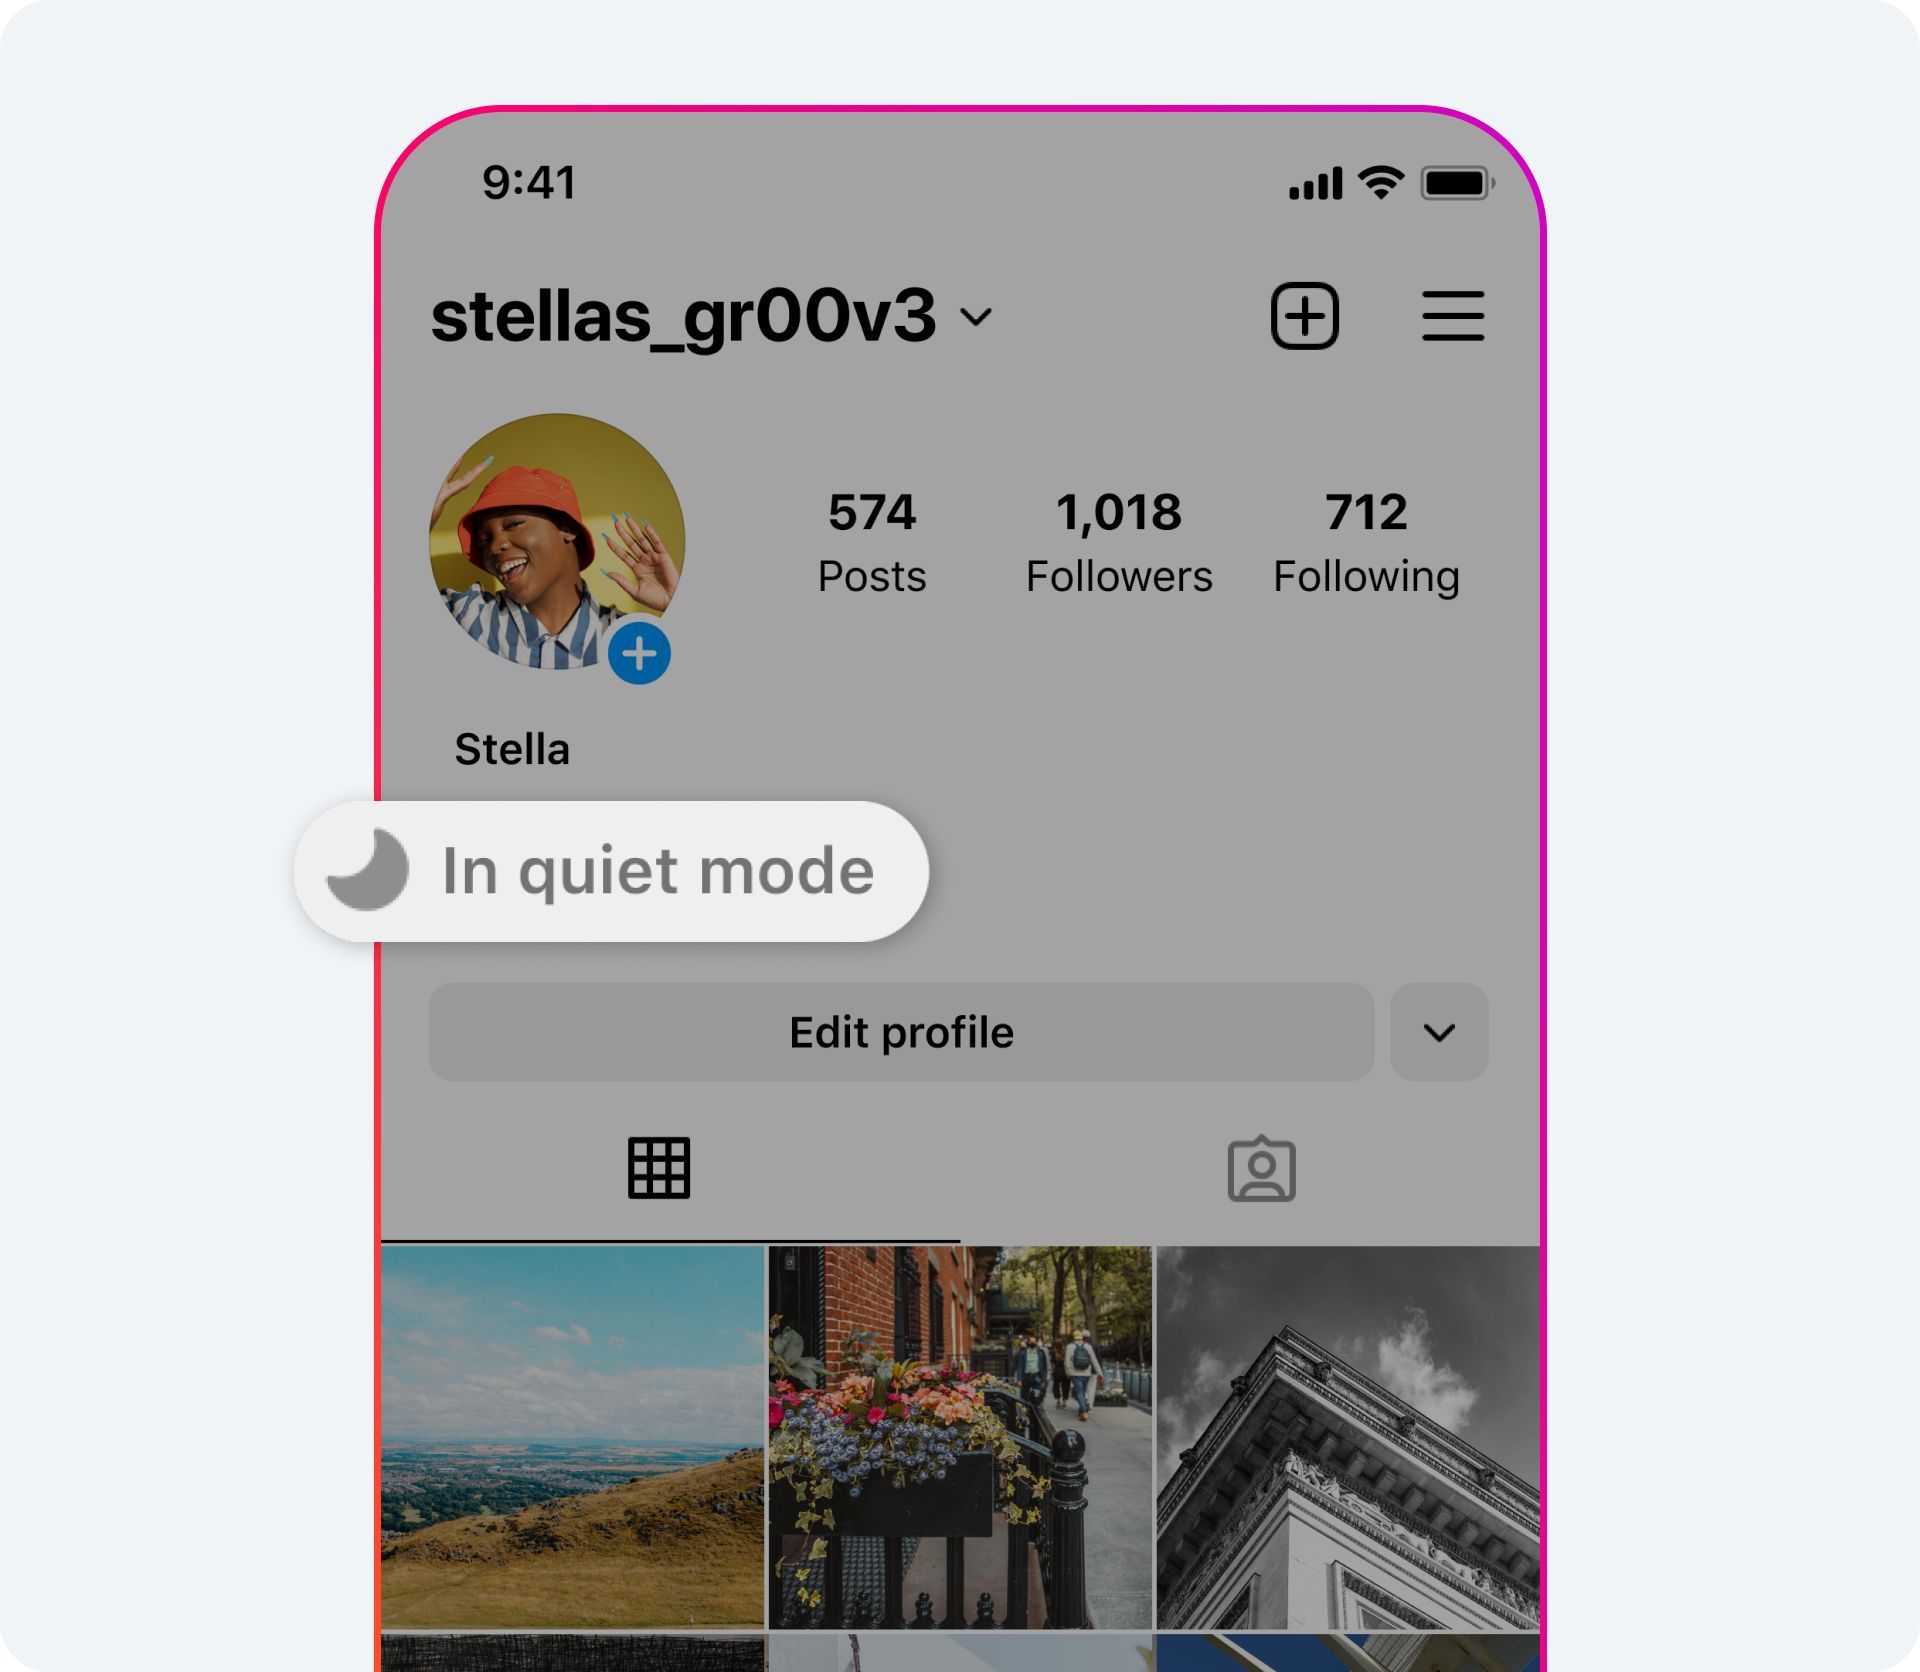 How to turn on Quiet Mode on Instagram